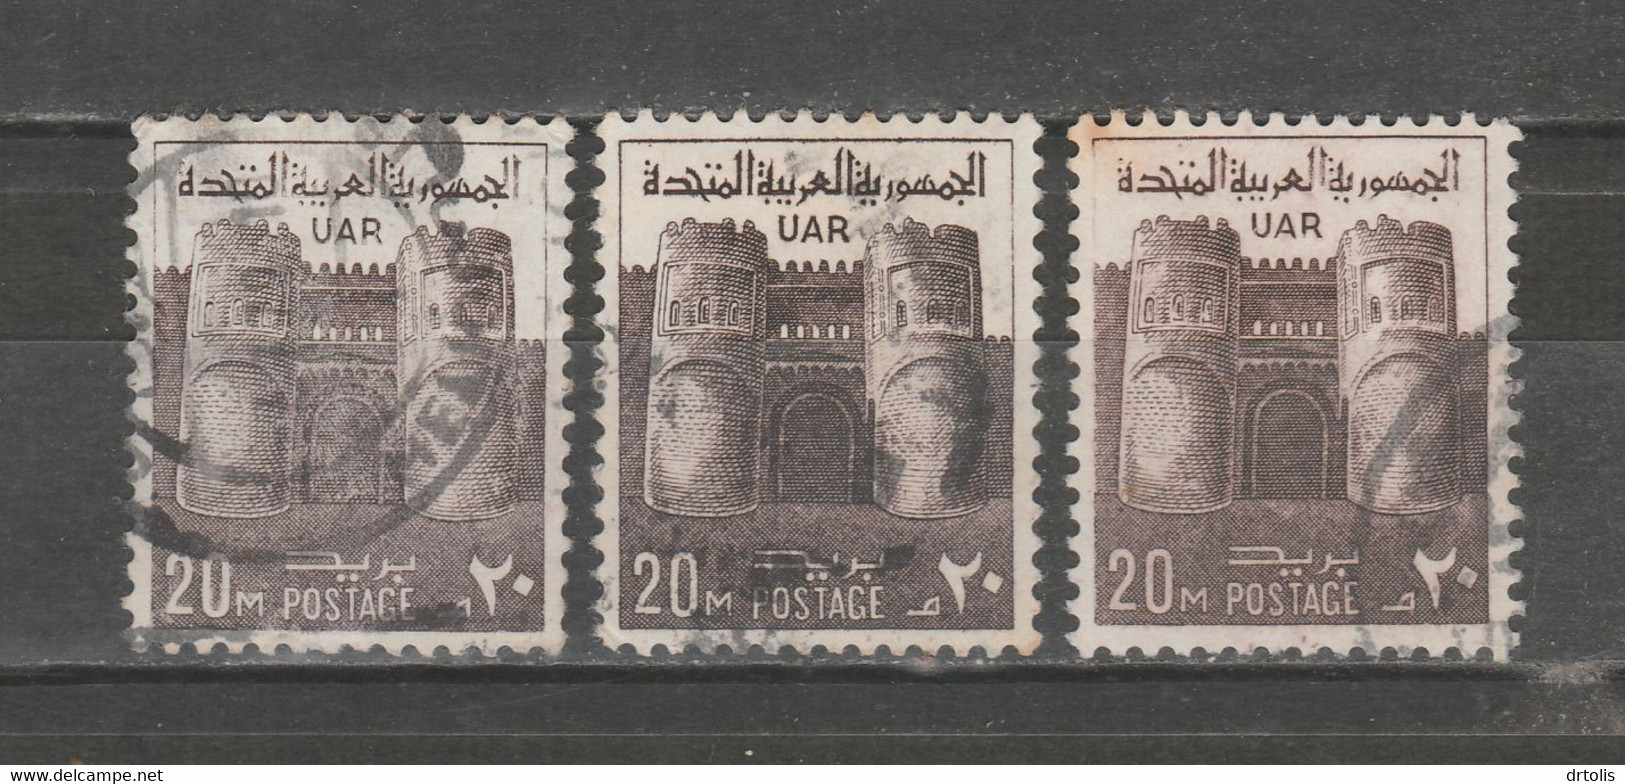 EGYPT / A RARE COLOR VARIETY / VF USED - Used Stamps